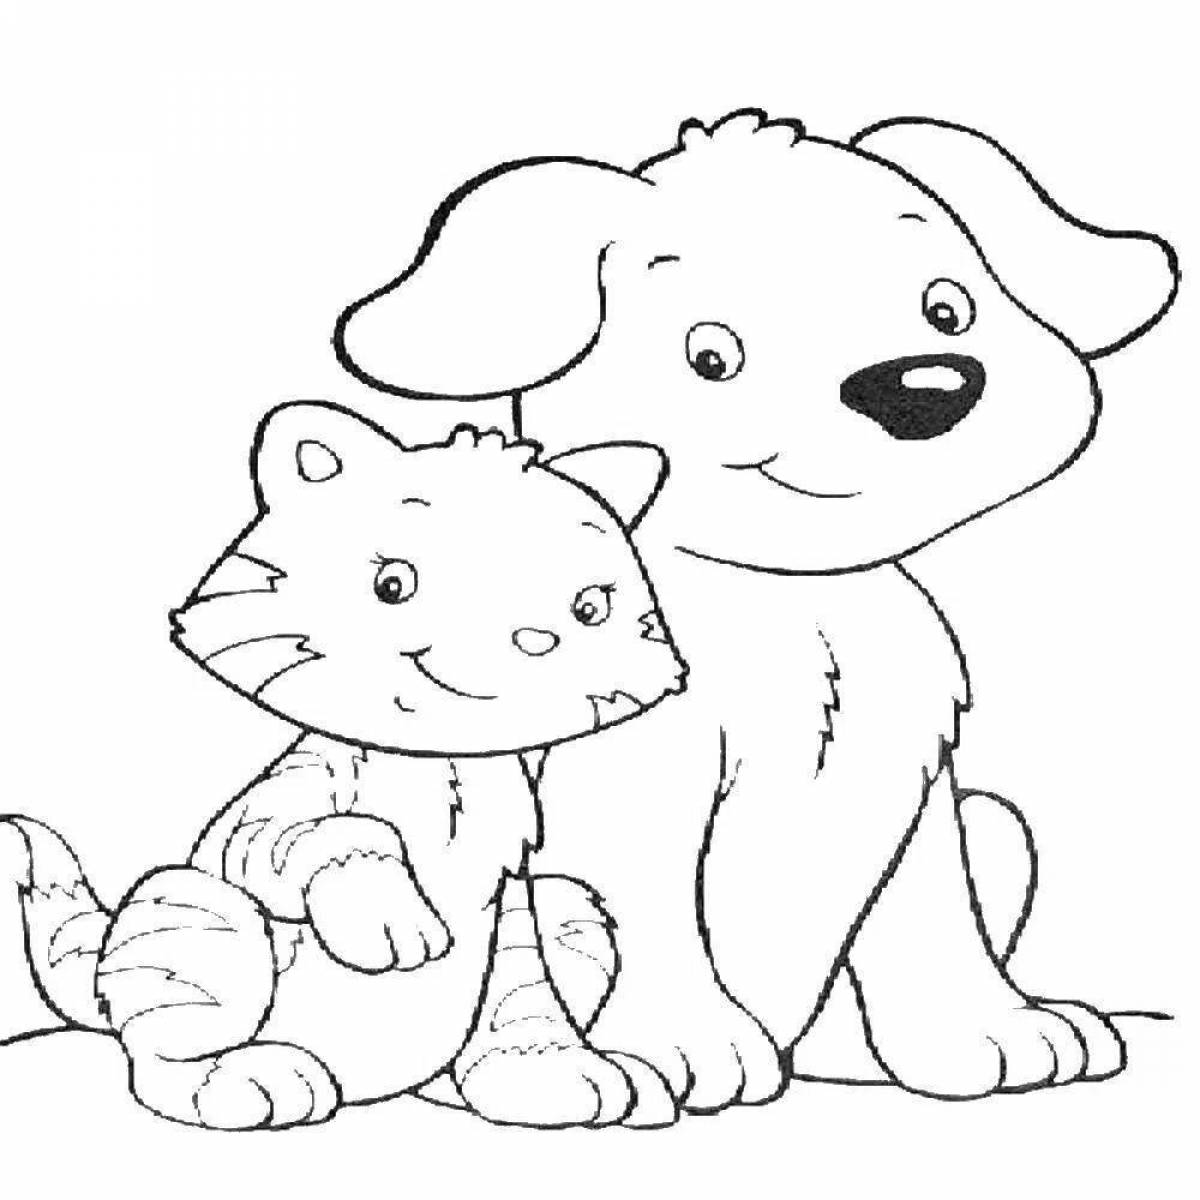 Colouring funny cute cats and dogs